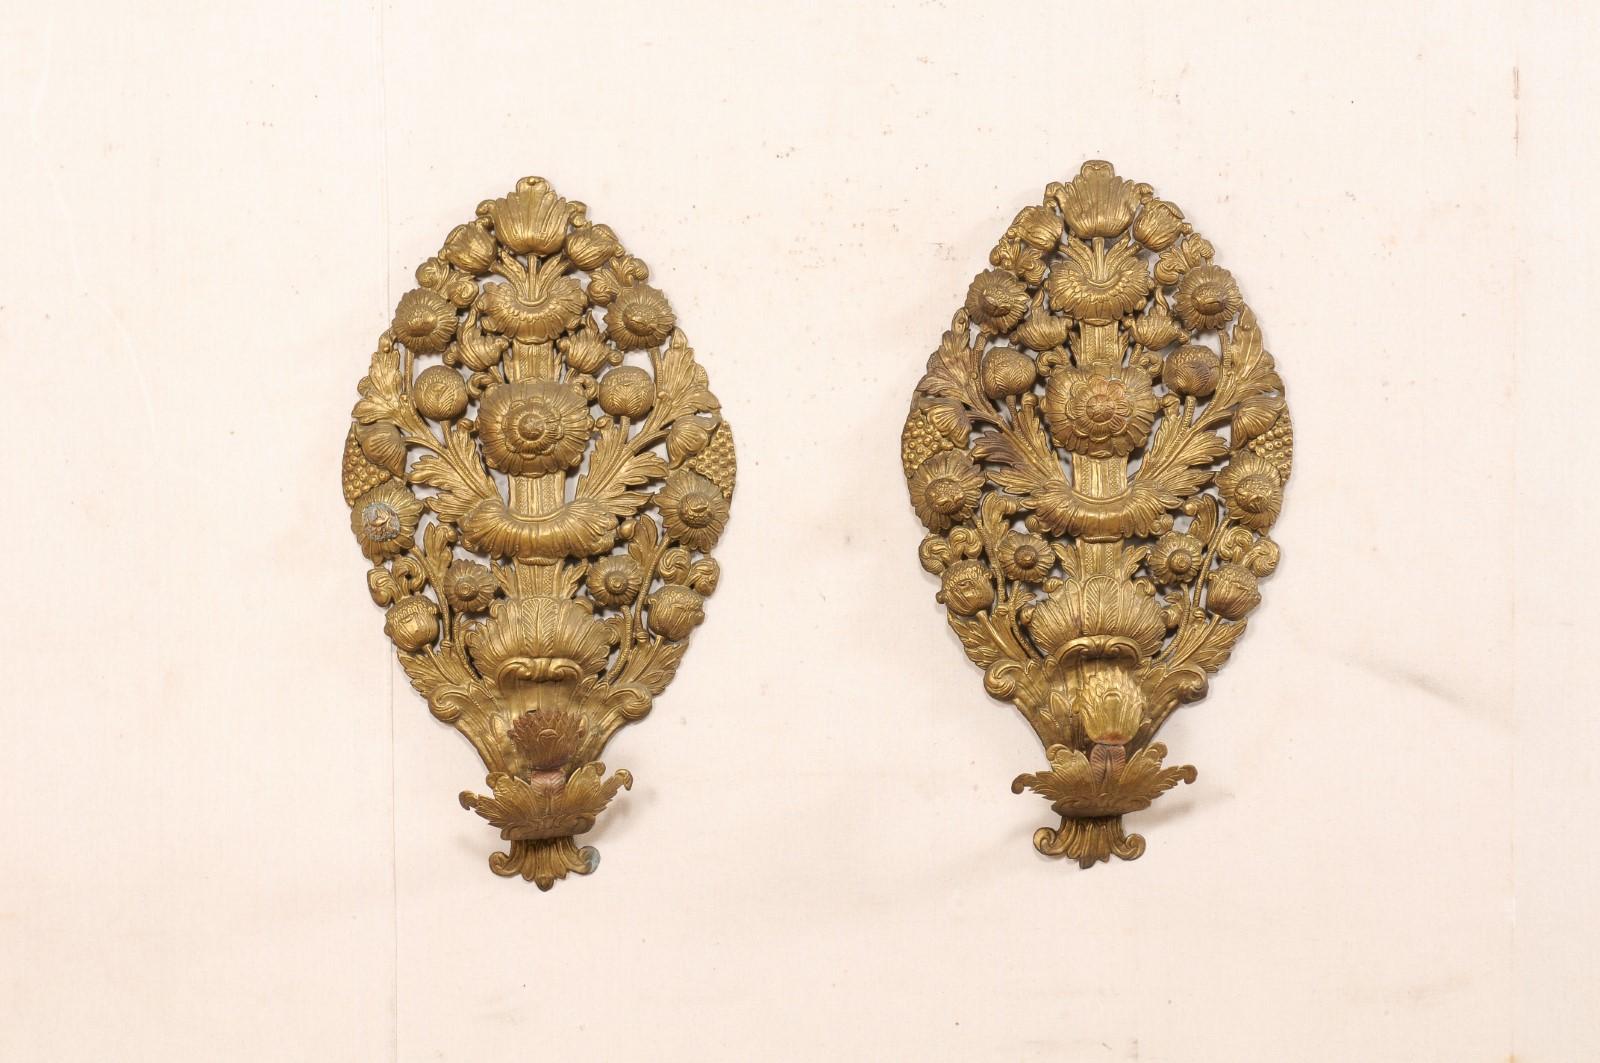 A French pair of brass repoussé single-light wall sconces from the late 18th century. This antique pair of wall decorations from France, Circa 1780-1800, have been created in brass with an ornate pierced repoussage in floral motif. Each sconce has a